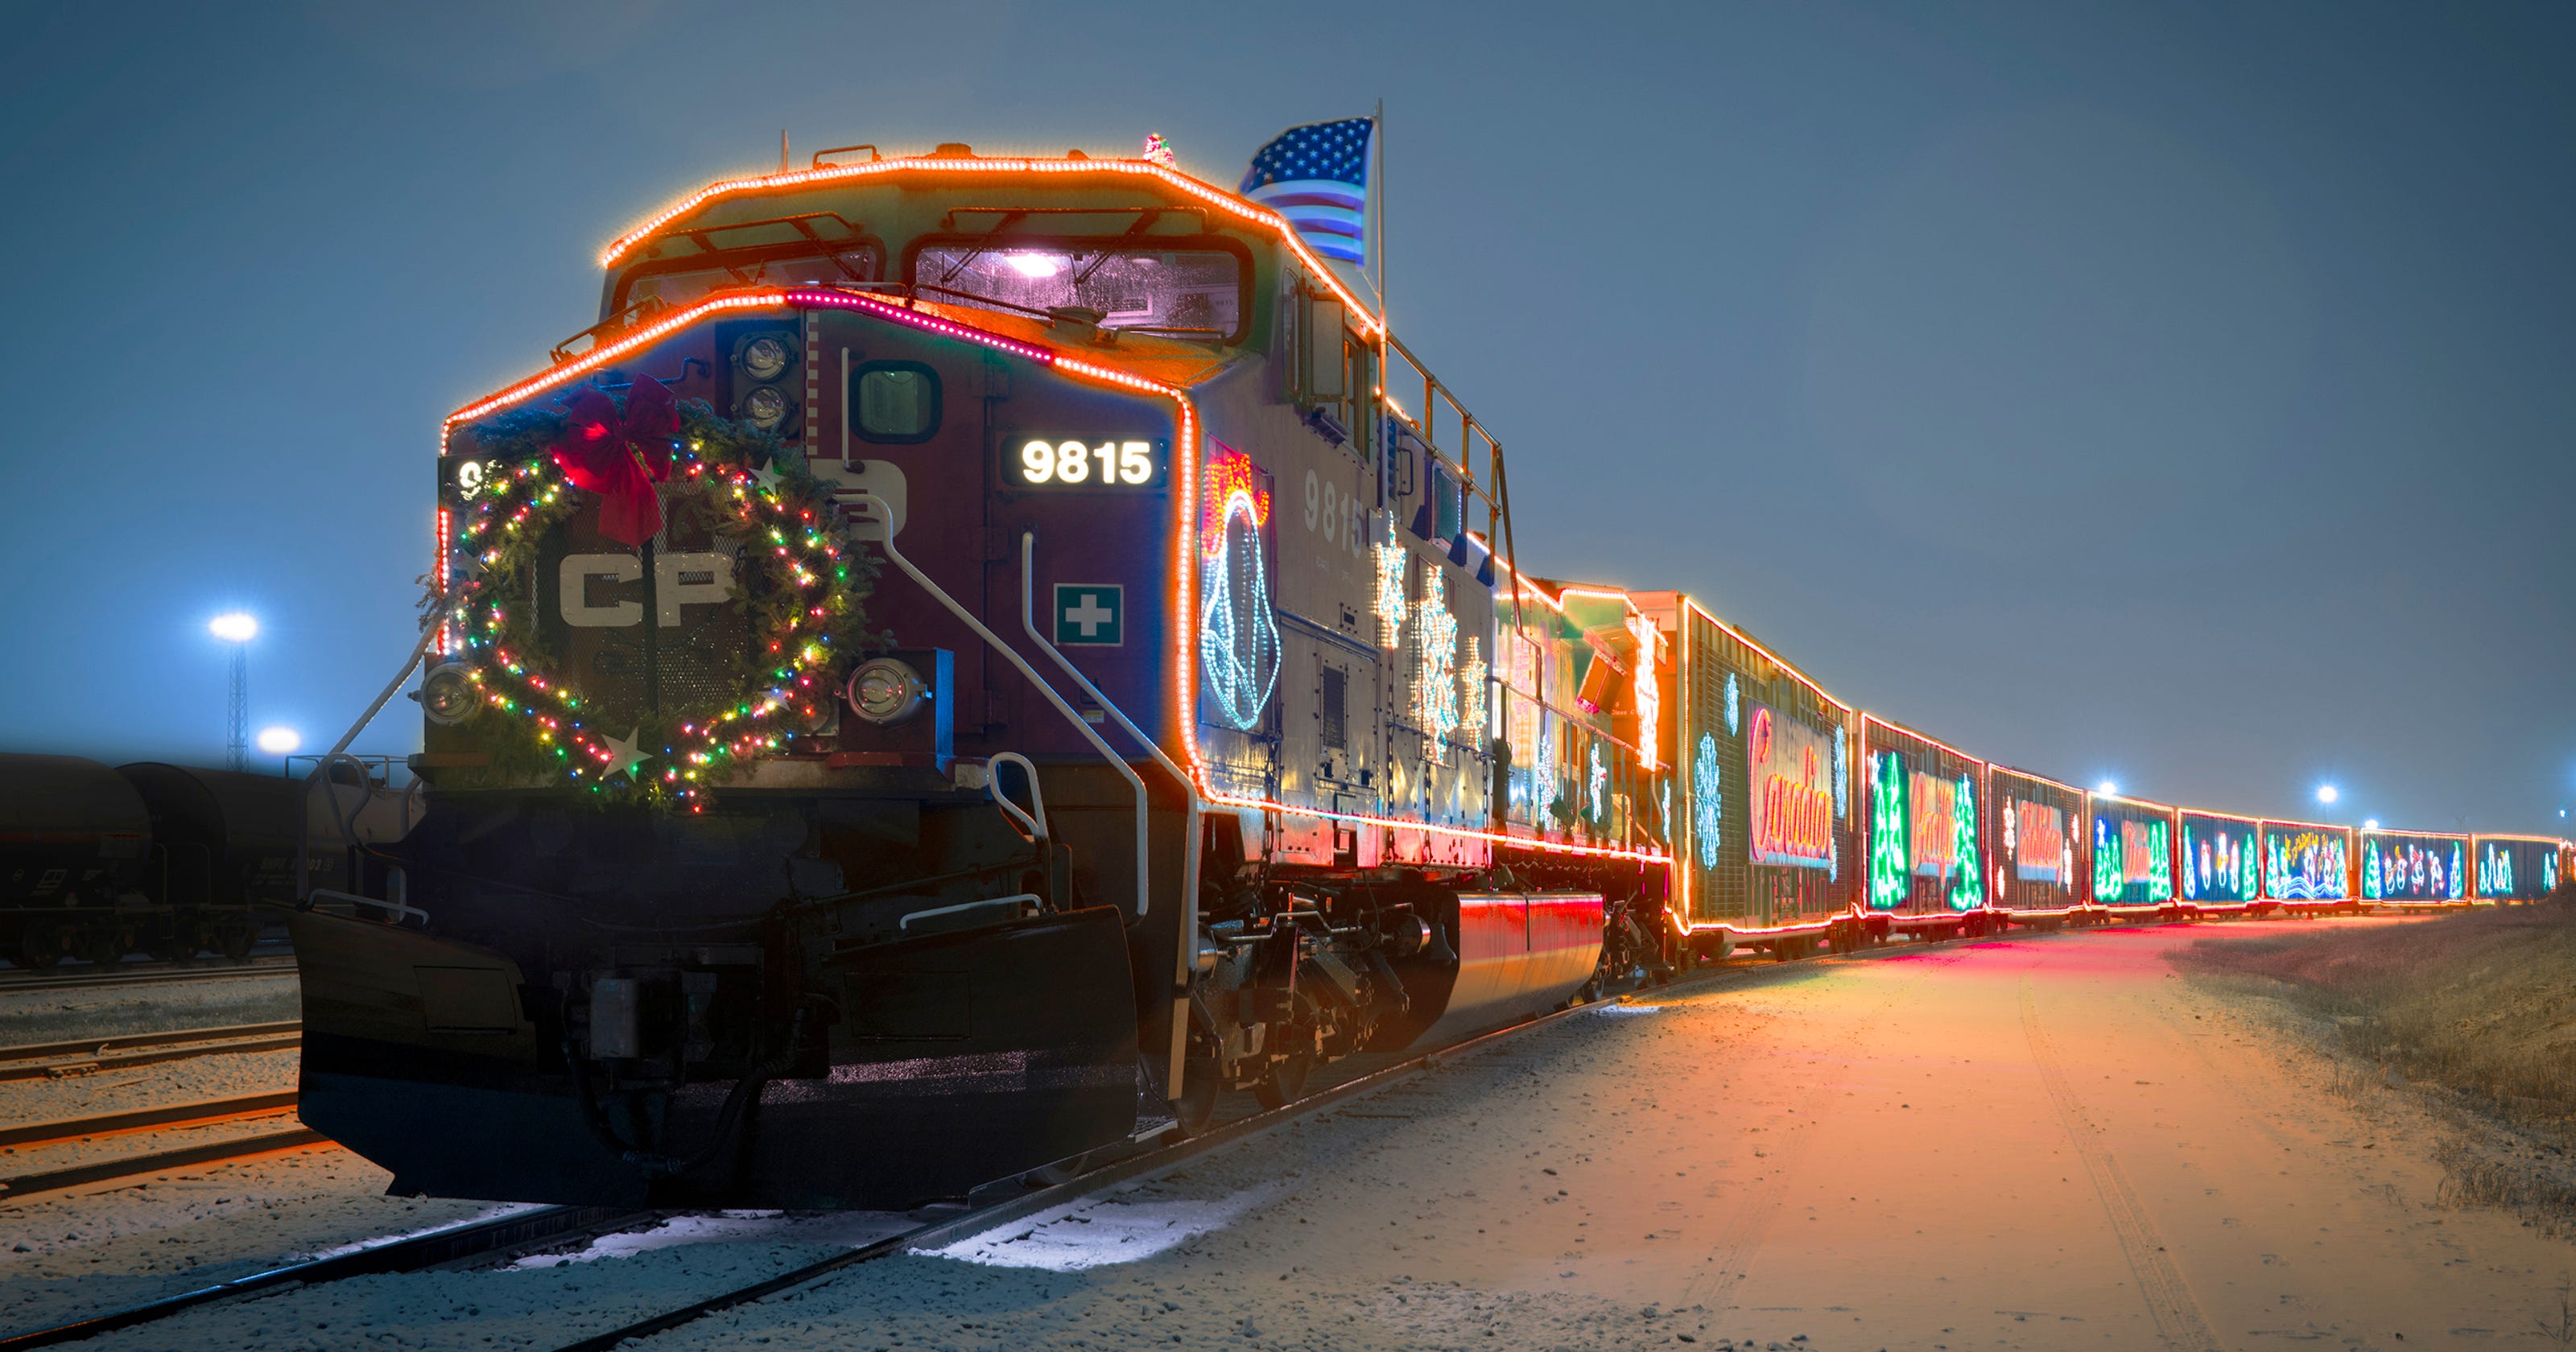 Canadian Pacific Holiday Train on schedule to visit Michigan